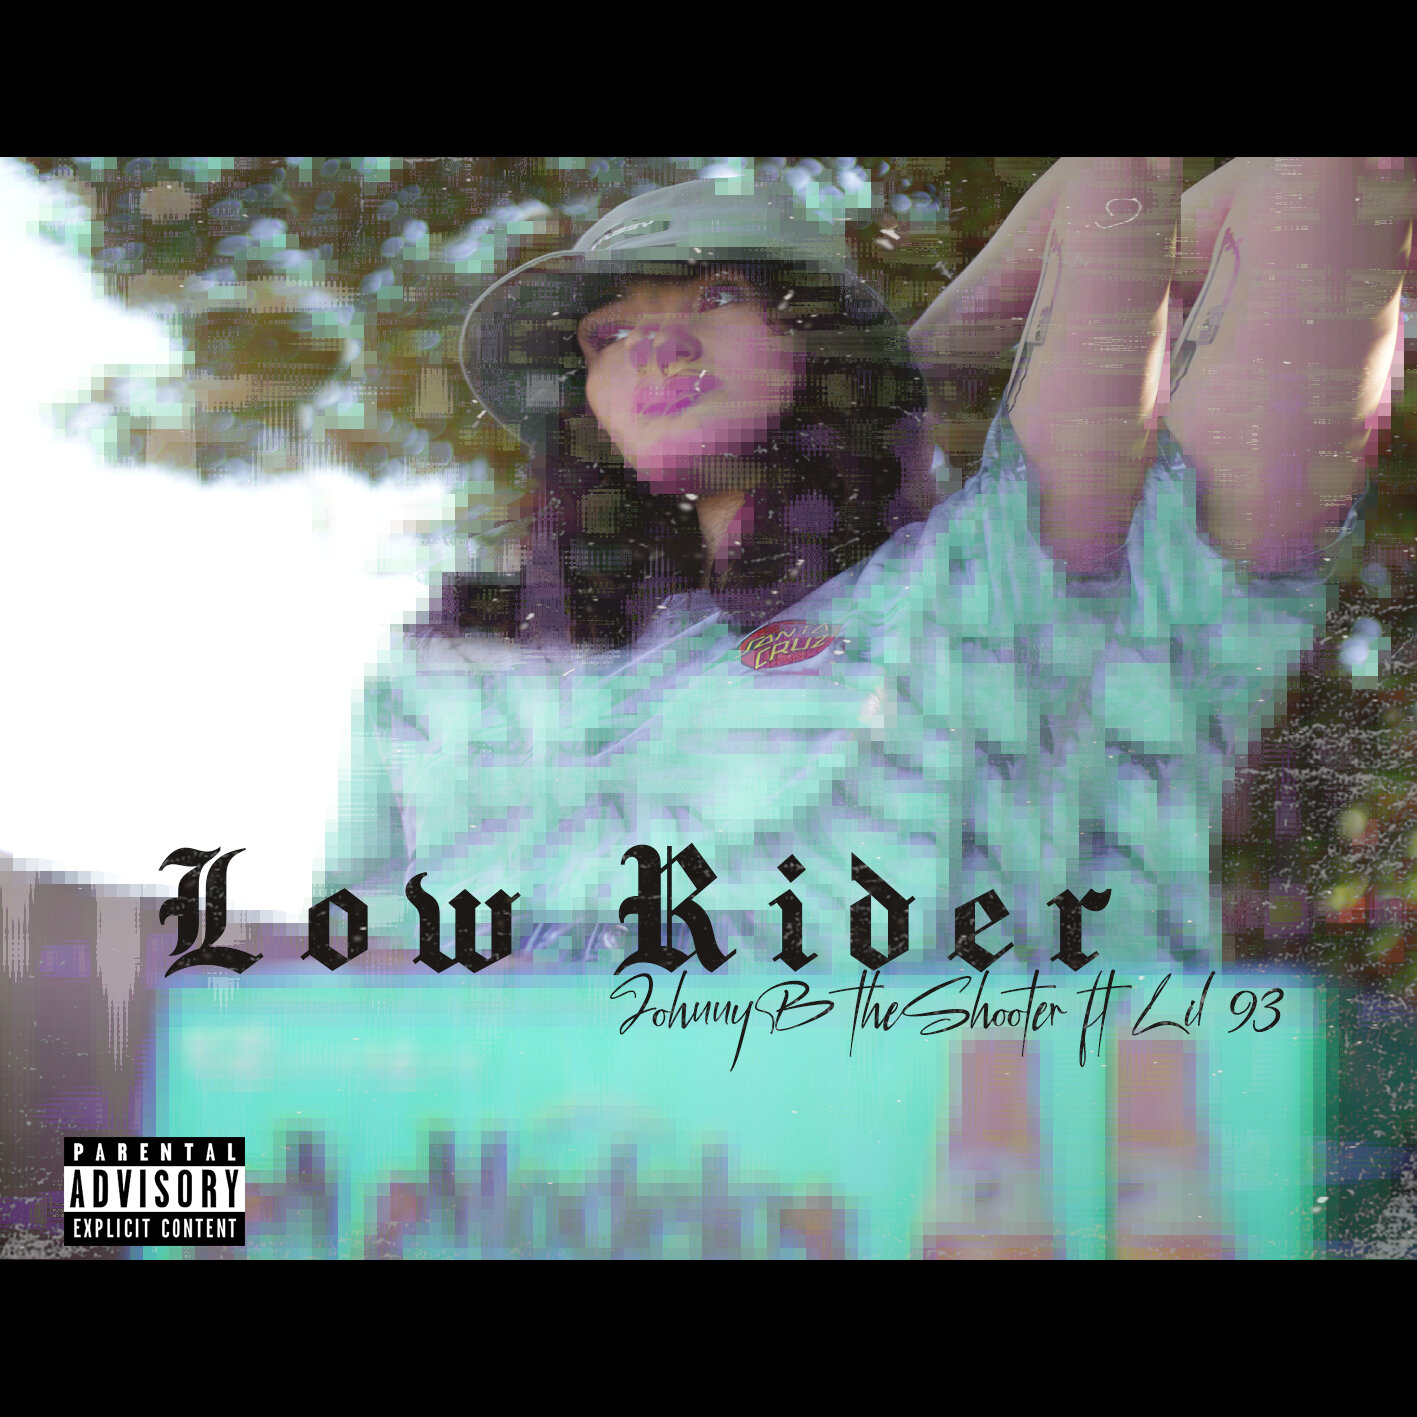 Low Rider - JohnnyB theShooter ft Lil 93 COVER.jpg